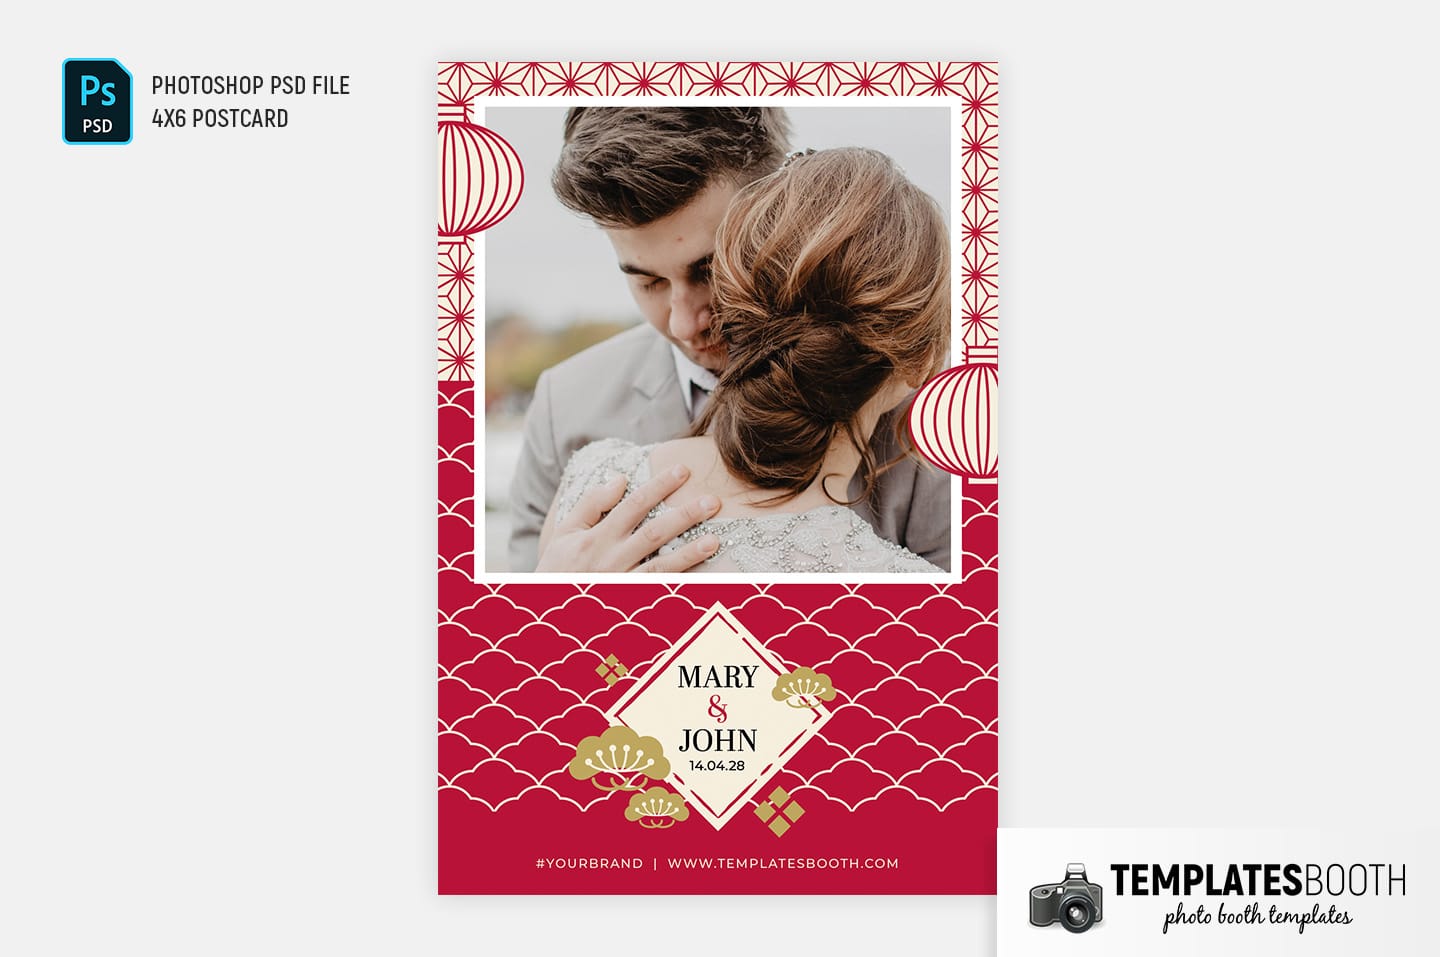 Chinese Wedding Photo Booth Template (4x6 postcard portrait)